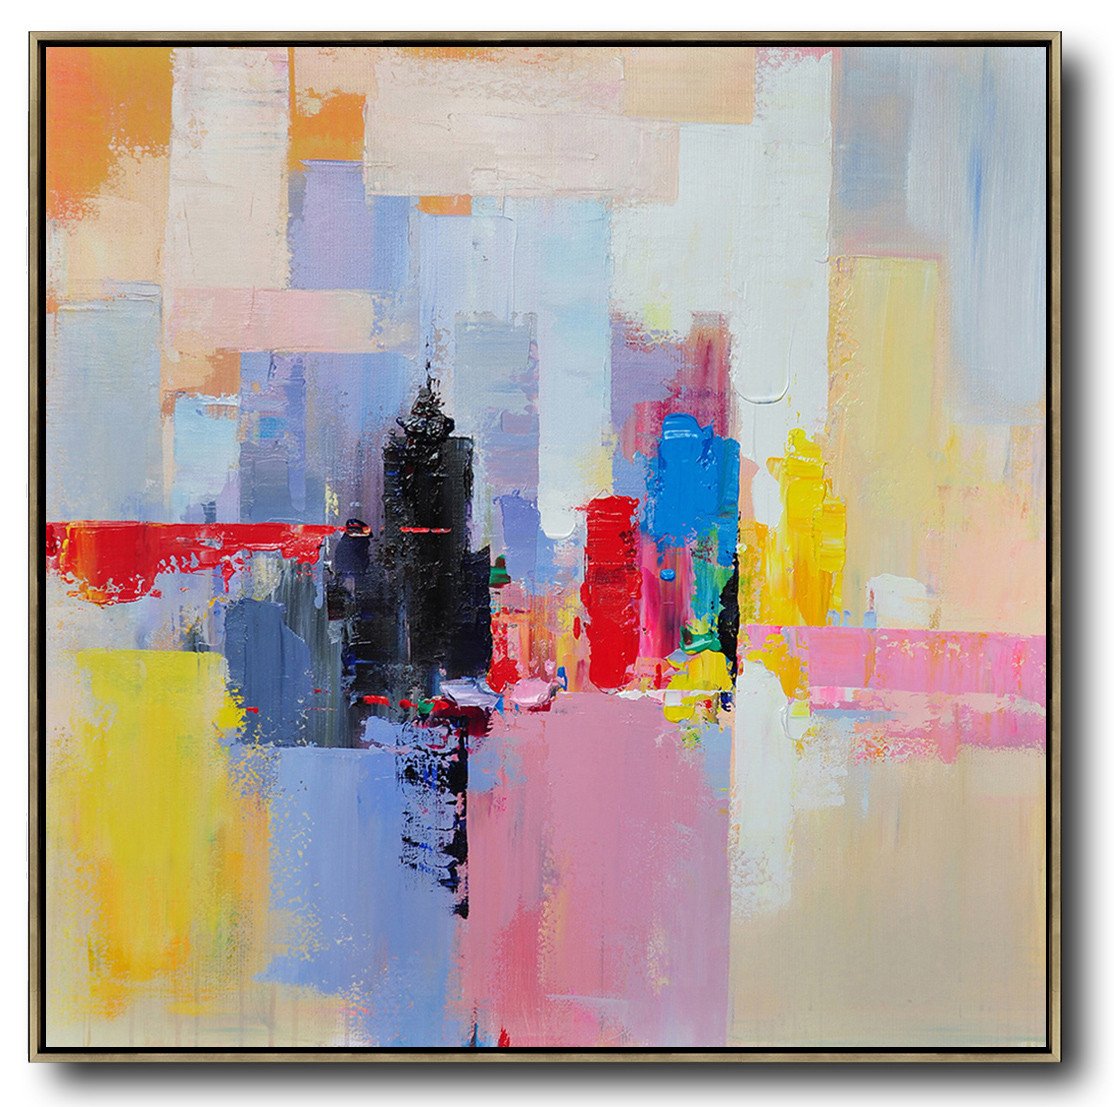 Hand-painted oversized Palette Knife Painting Contemporary Art on canvas, large square canvas art art canvas for sale